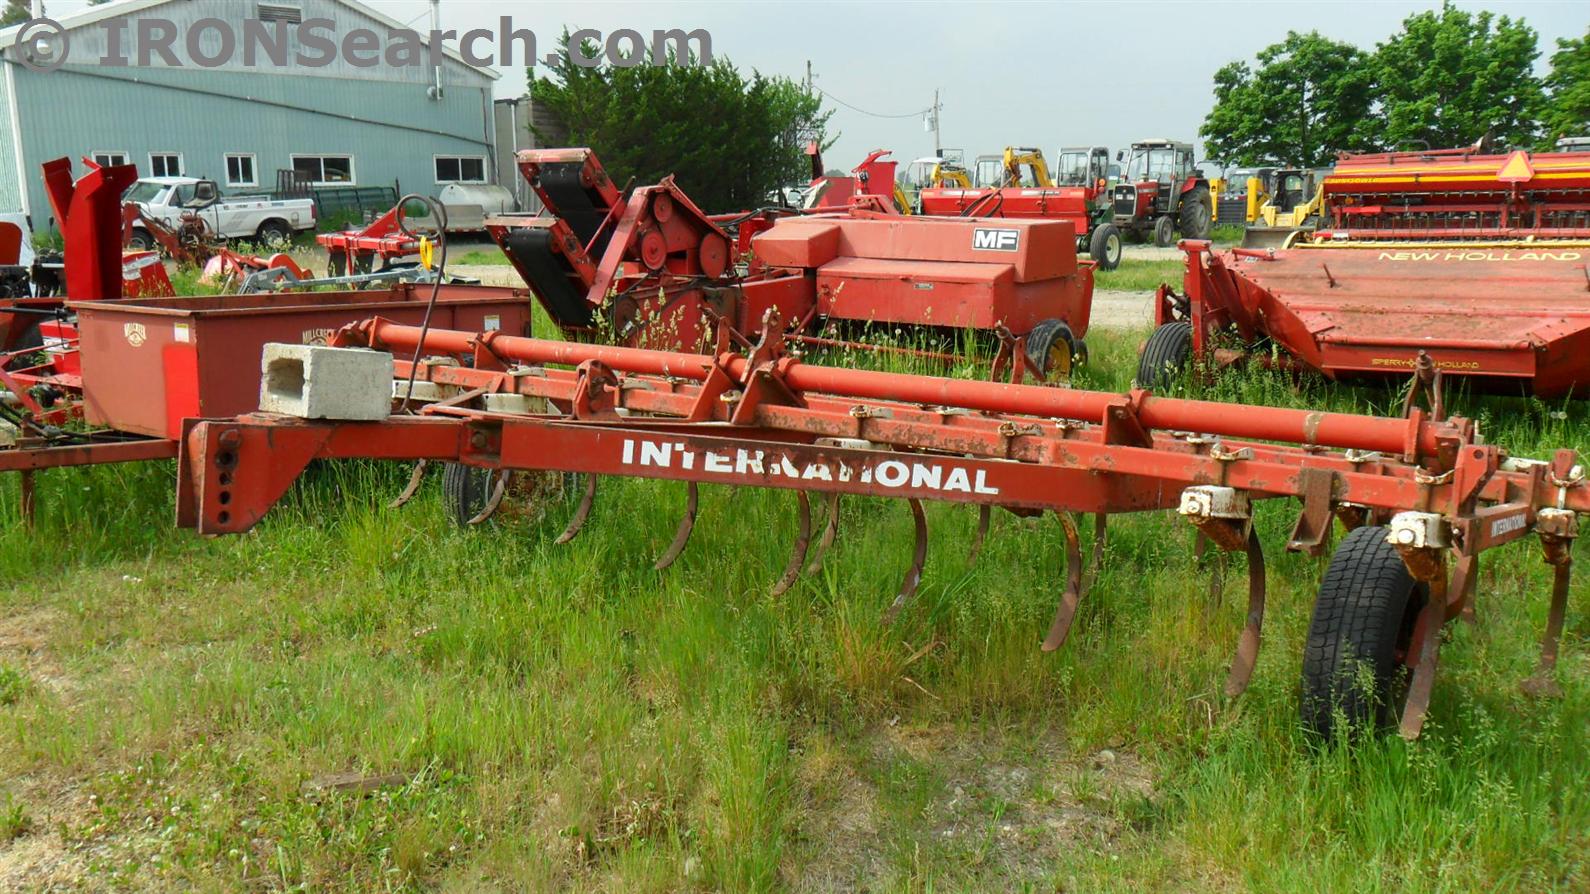 IRON Search - International 4500 Cultivator RowCrop For Sale By ...